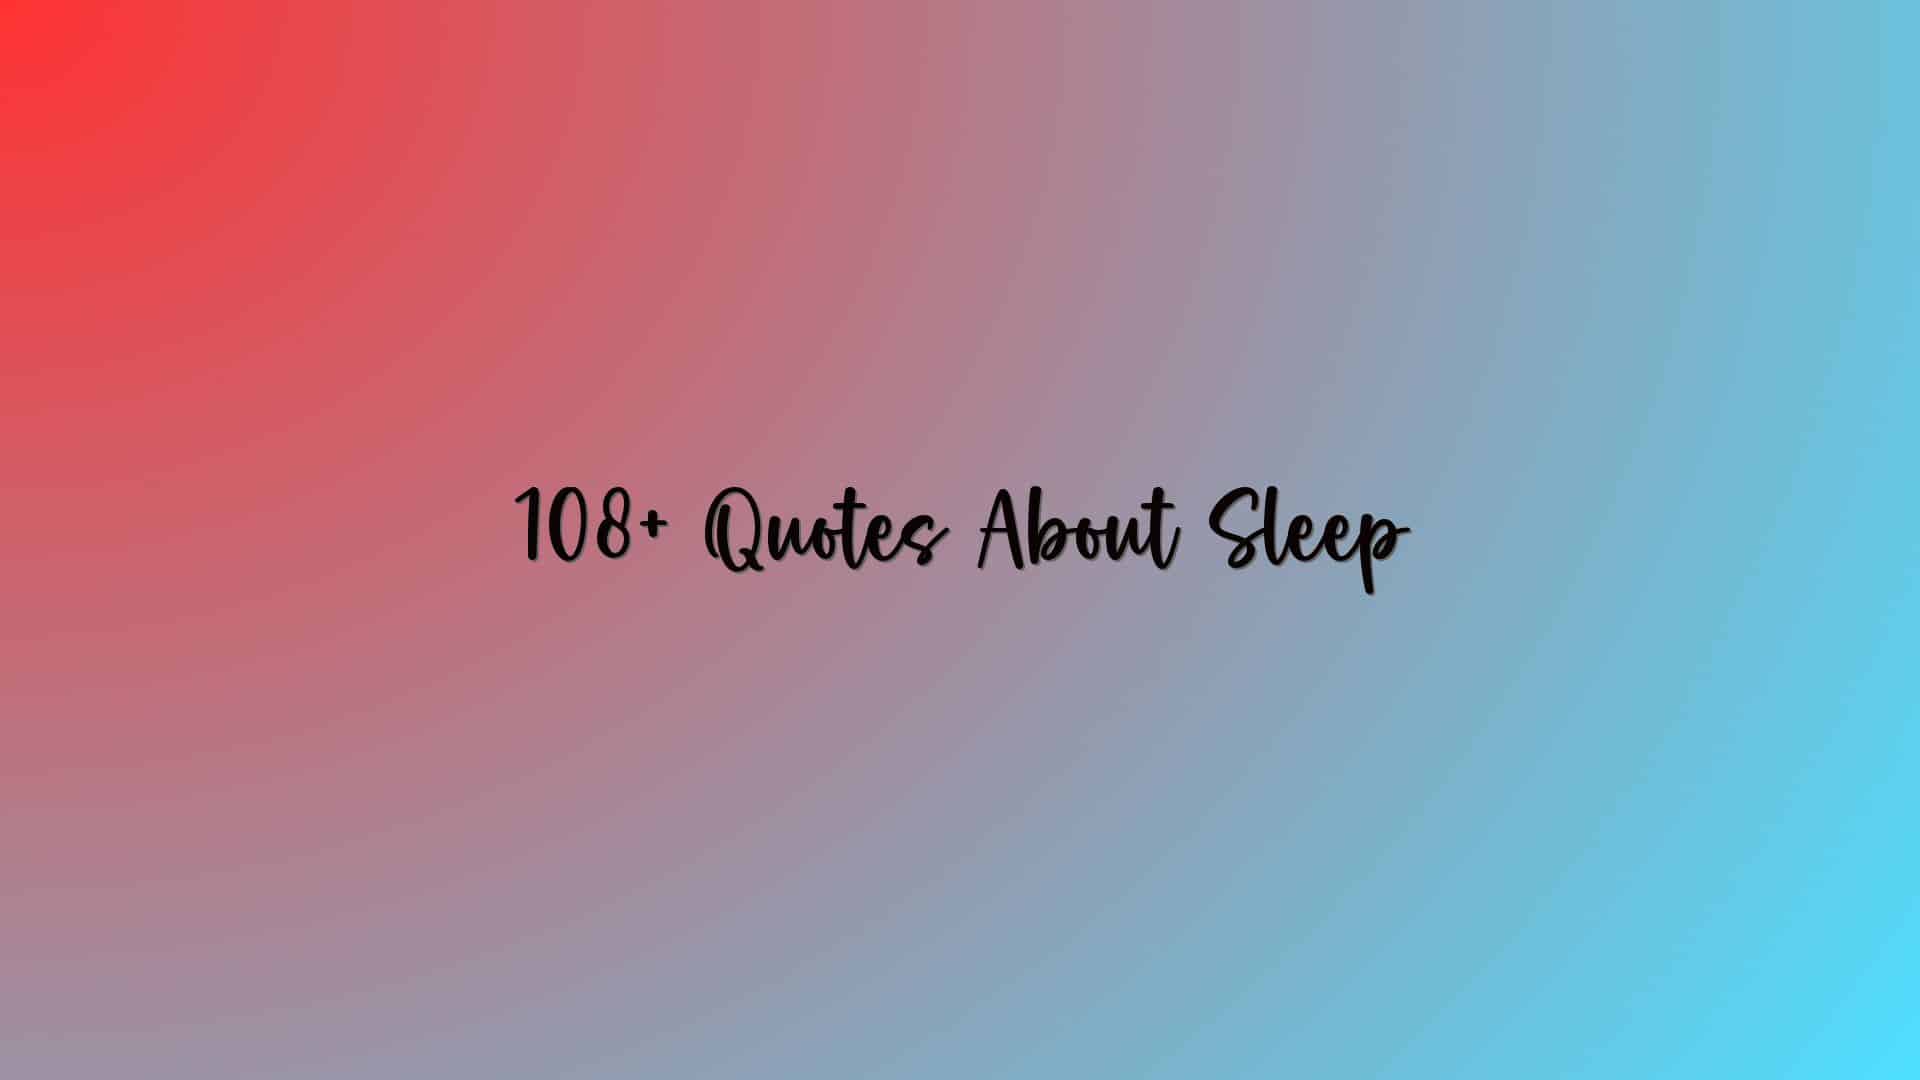 108+ Quotes About Sleep